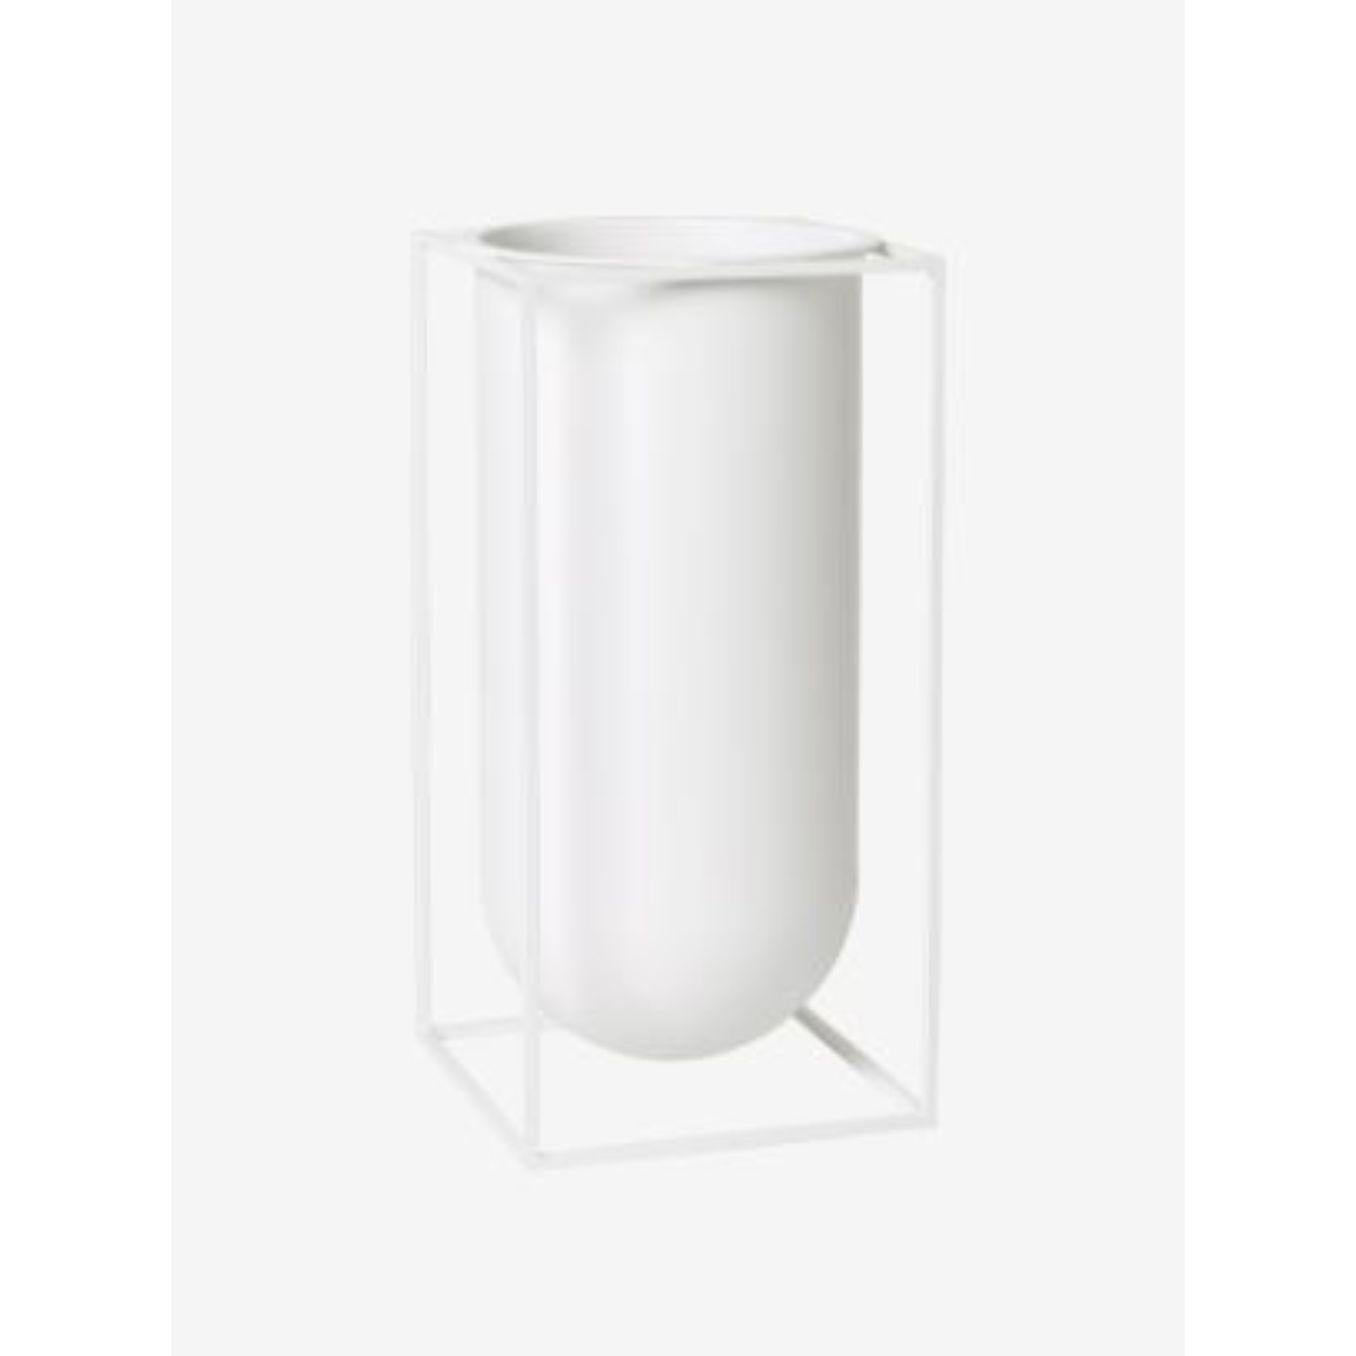 White Nolia Kubus vase by Lassen
Dimensions: D 20 x W 20 x H 40 cm 
Materials: Metal 
Weight: 3.50 Kg

Staying beautifully grounded with dimensions that work perfectly on this level, the Nolia floor vase is a new member of the iconic Kubus